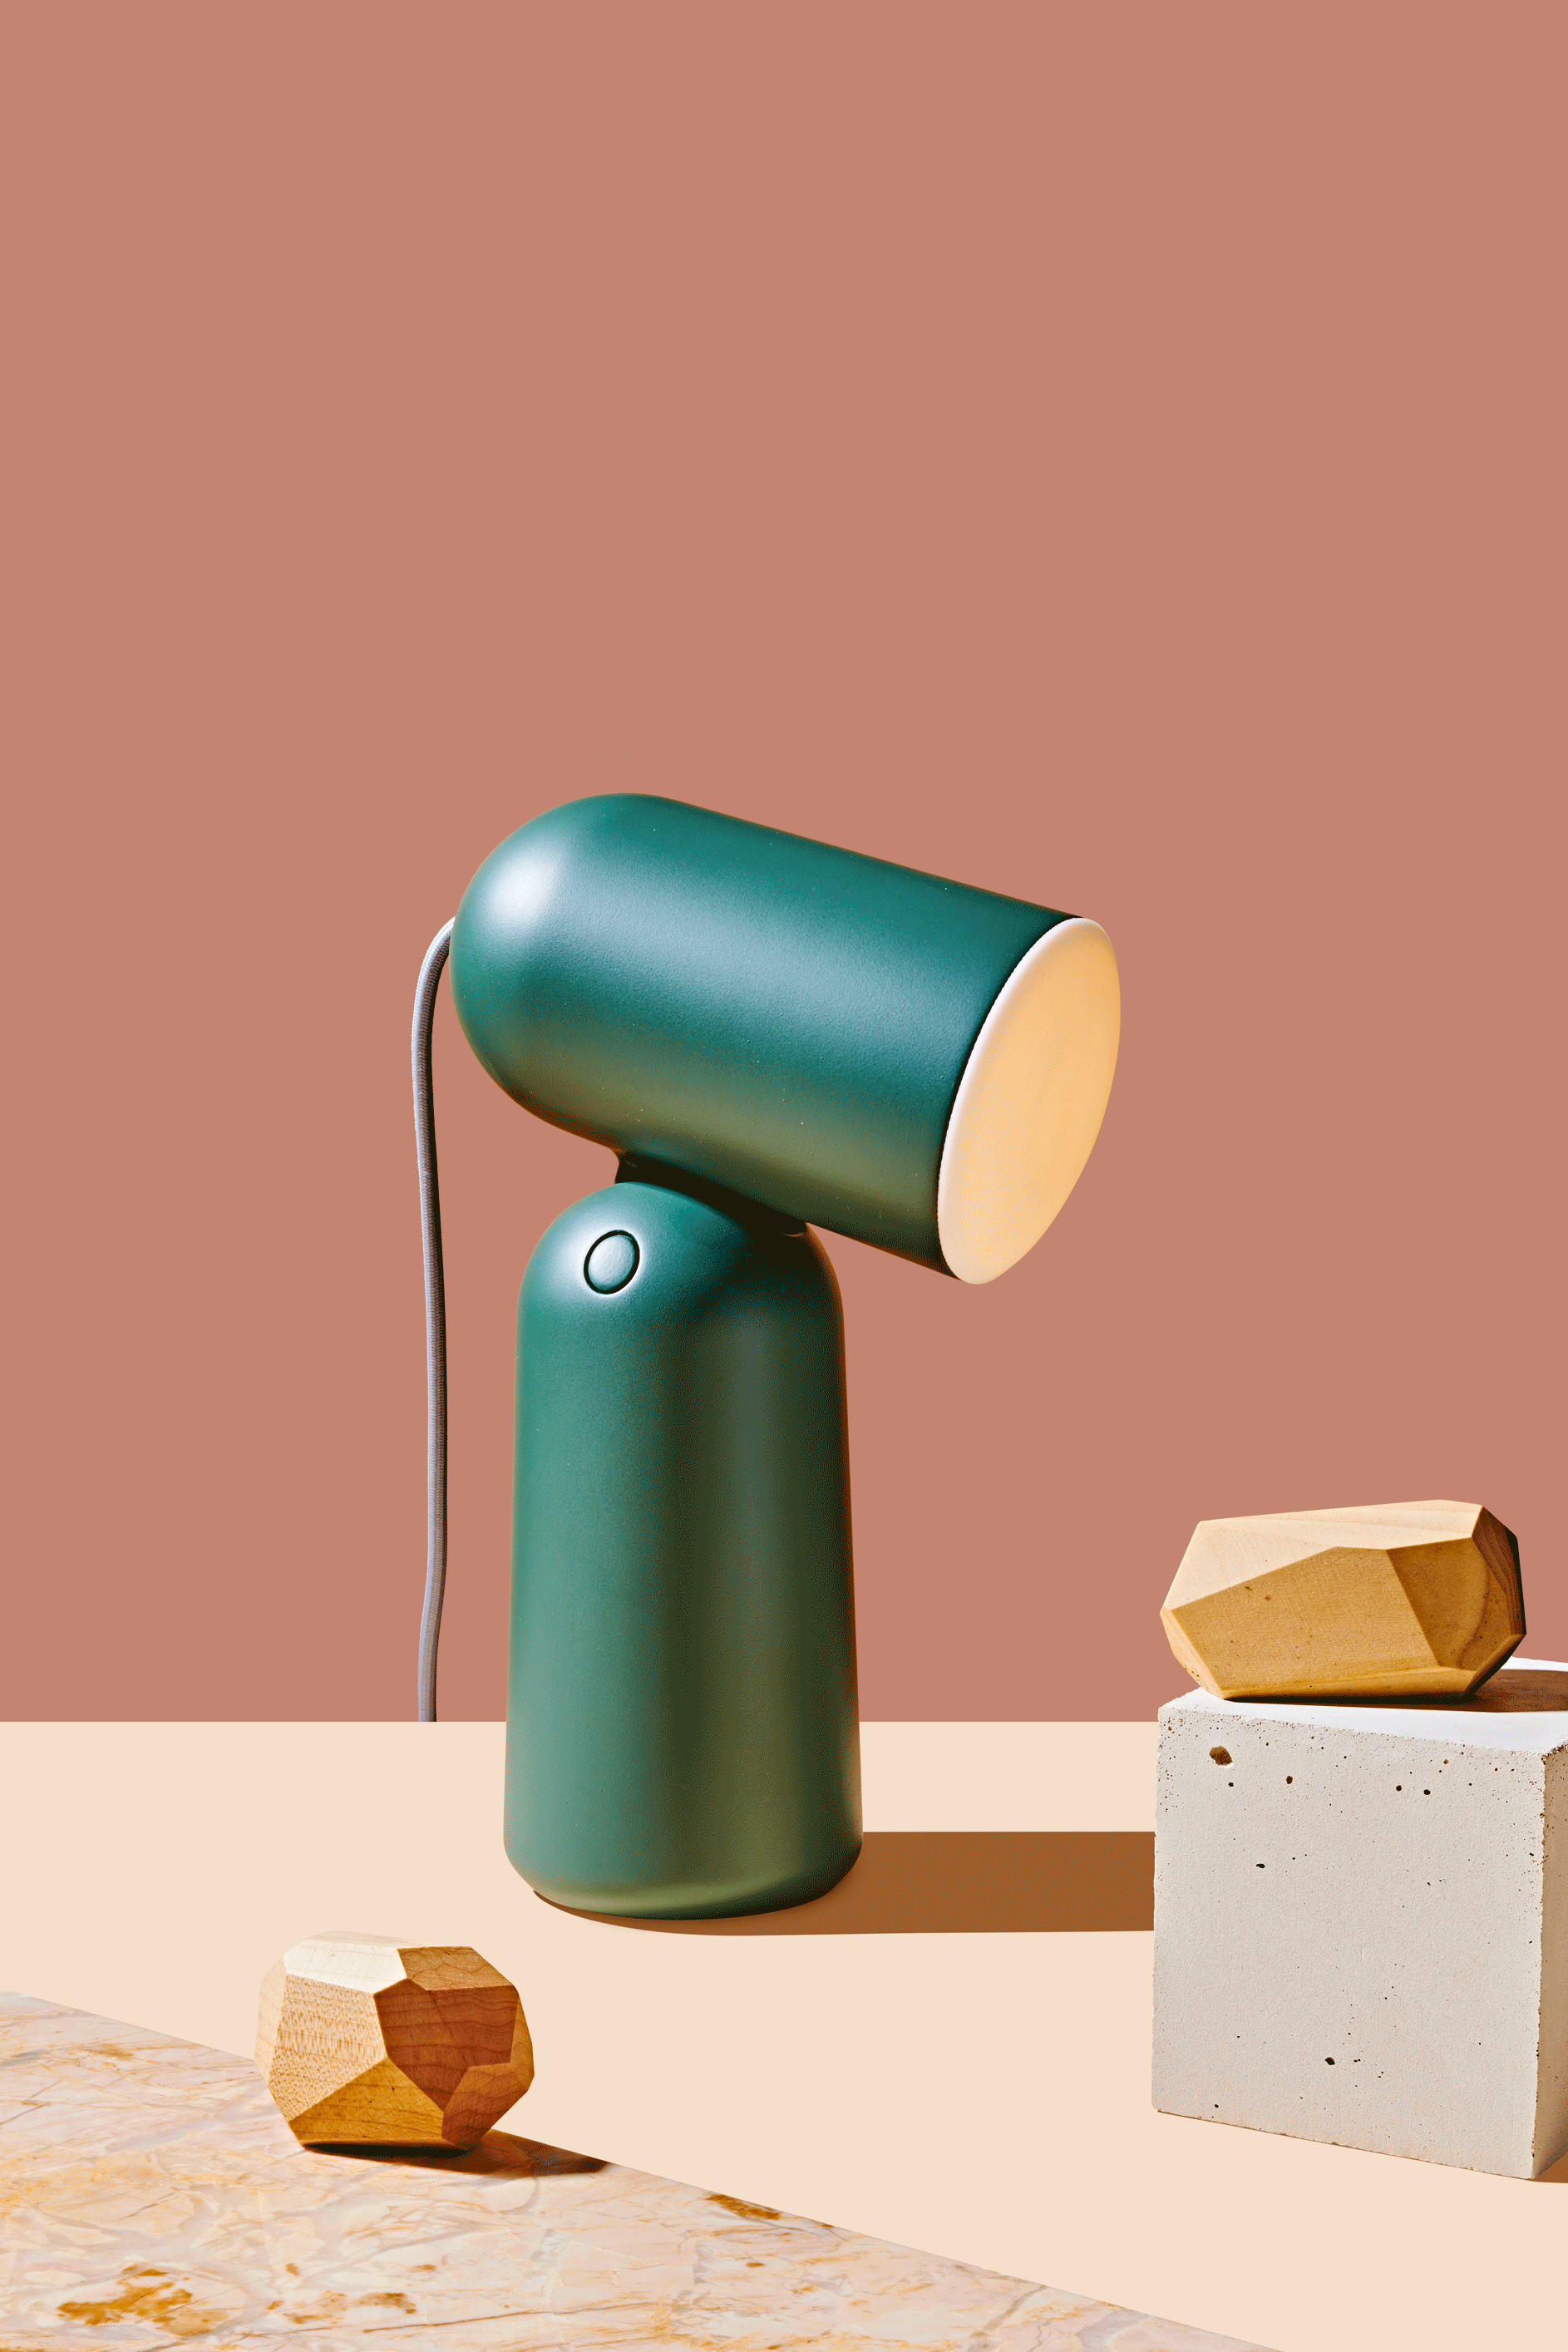 A dark green Buddy Table Light which is part of the 2019 Curbed Holiday Gift Guide. The top part of the light is moving up and down. This is an animated gif. On the table around the light are various design objects. There is a mauve backdrop.